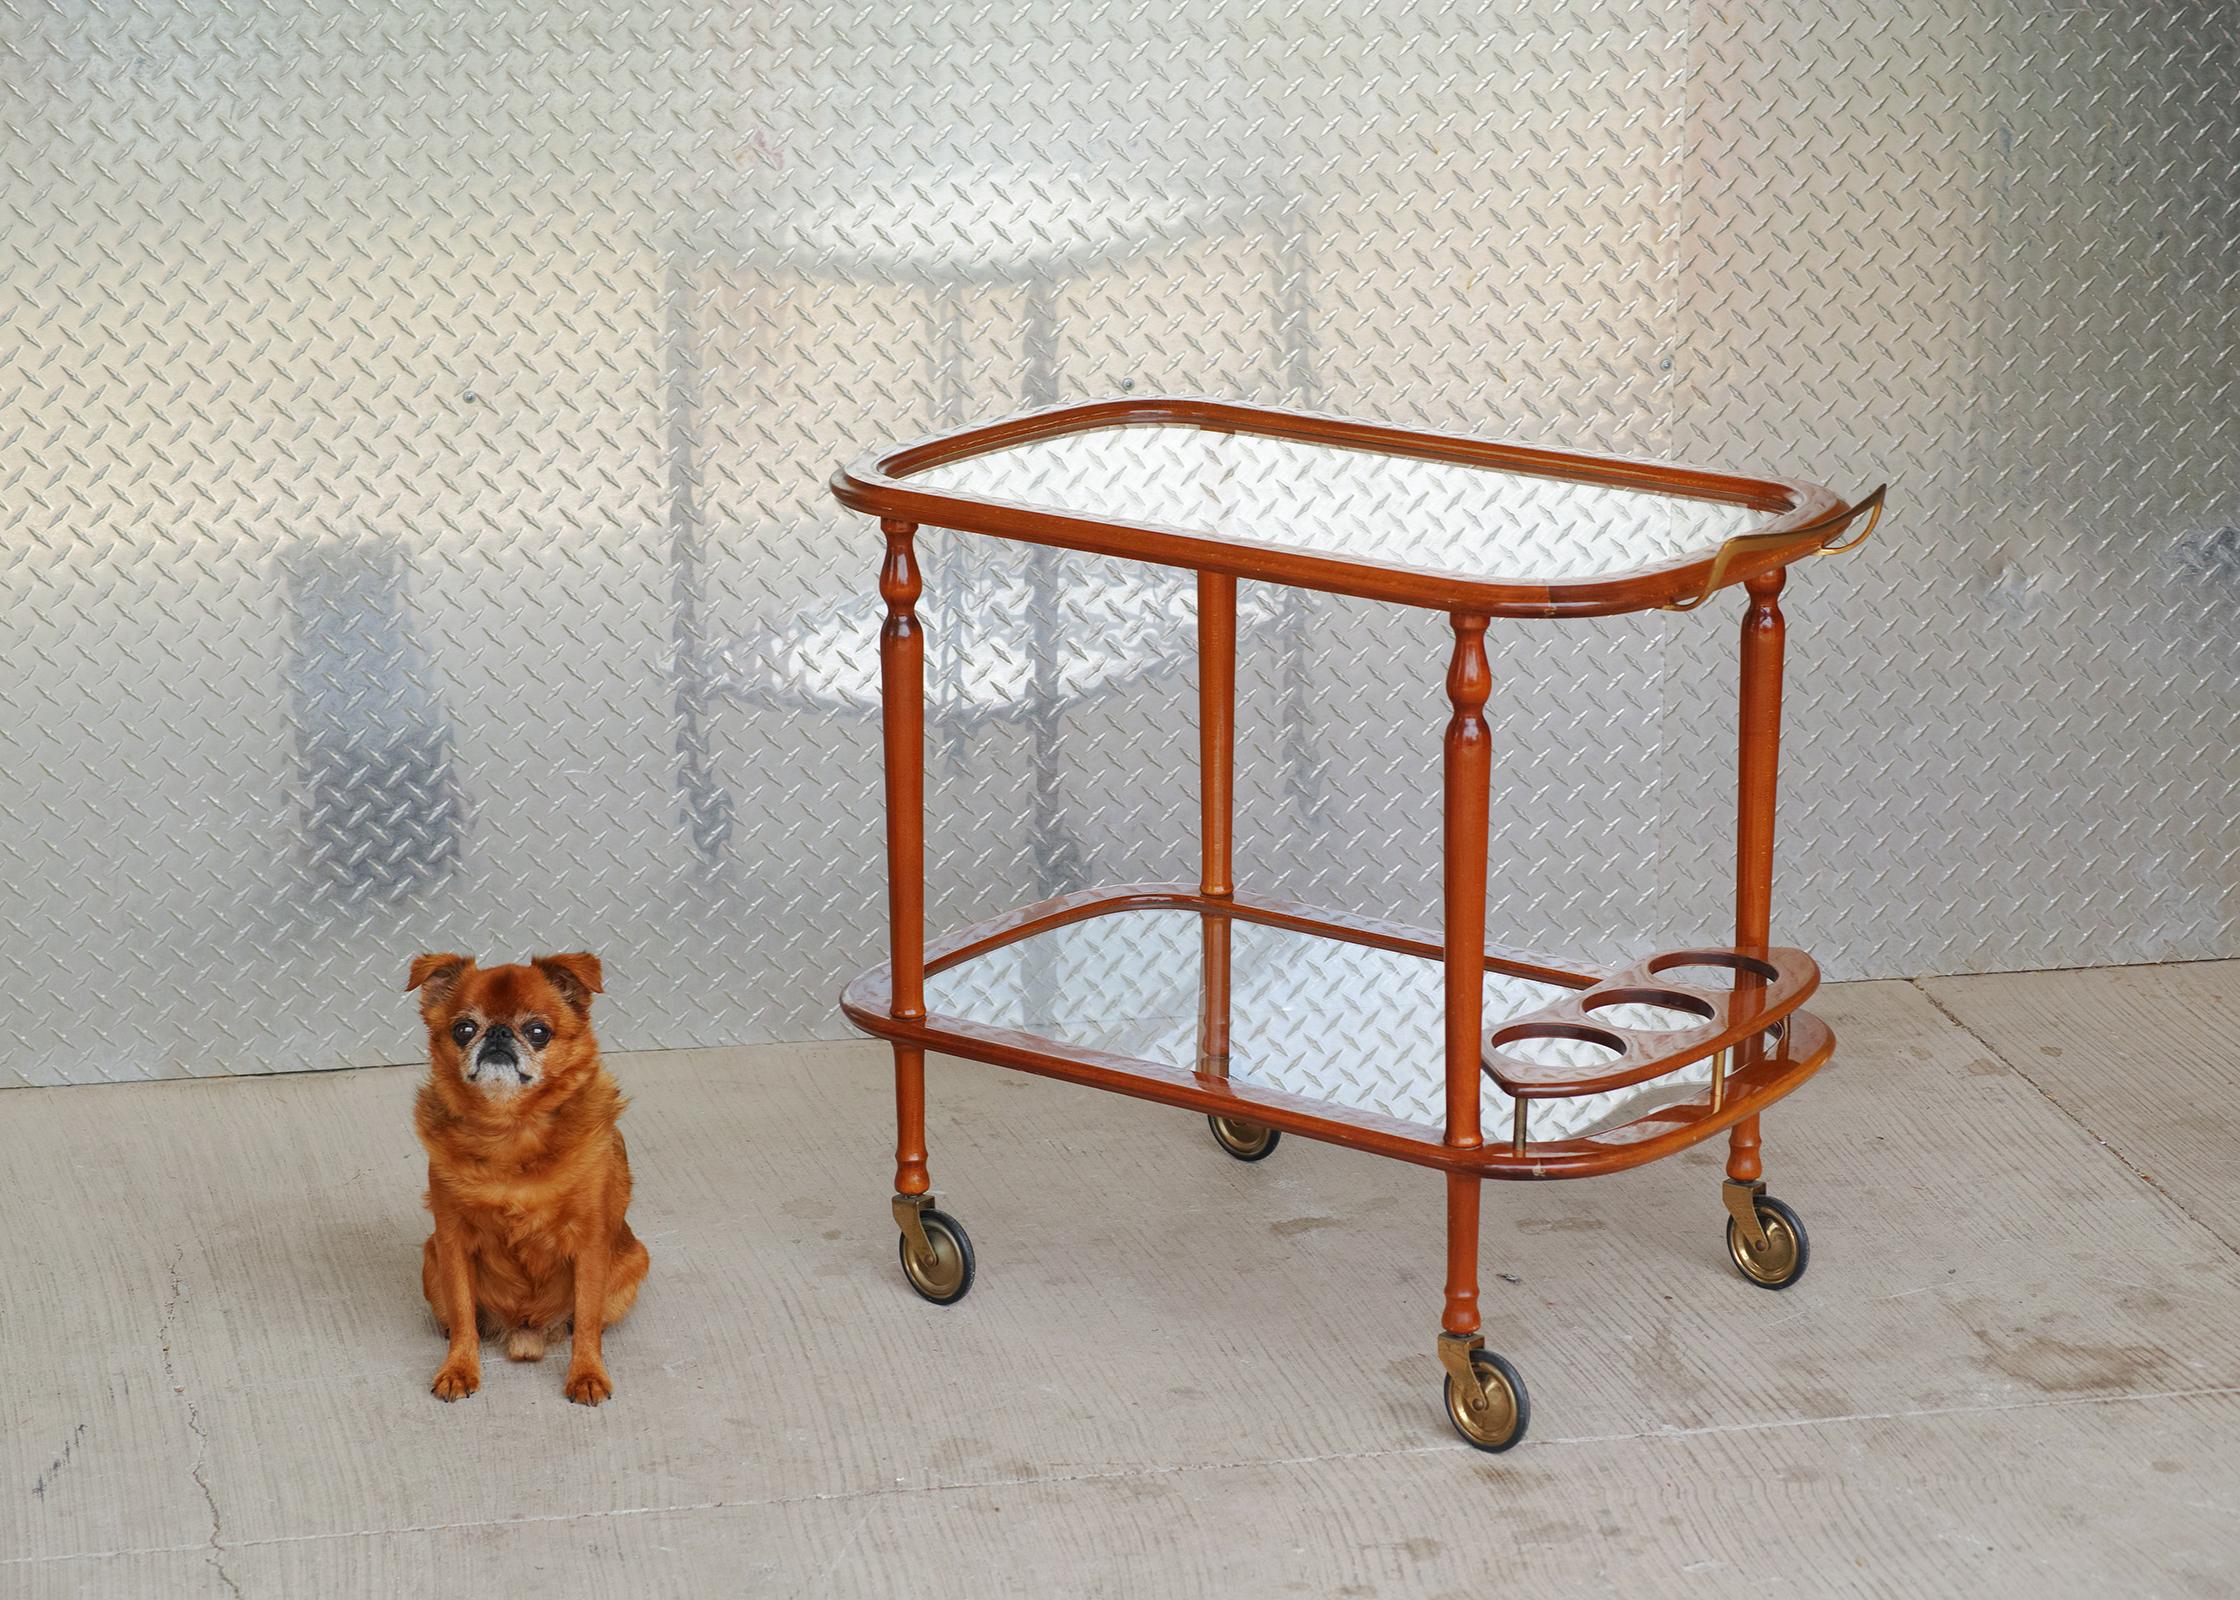 For your consideration is this all-original Italian lacquered bar cart dating from the 1960s. It features a sturdy yet lightweight solid wood frame with original finish and two tier inset glass tops. The lower tier features three bottle holders. The